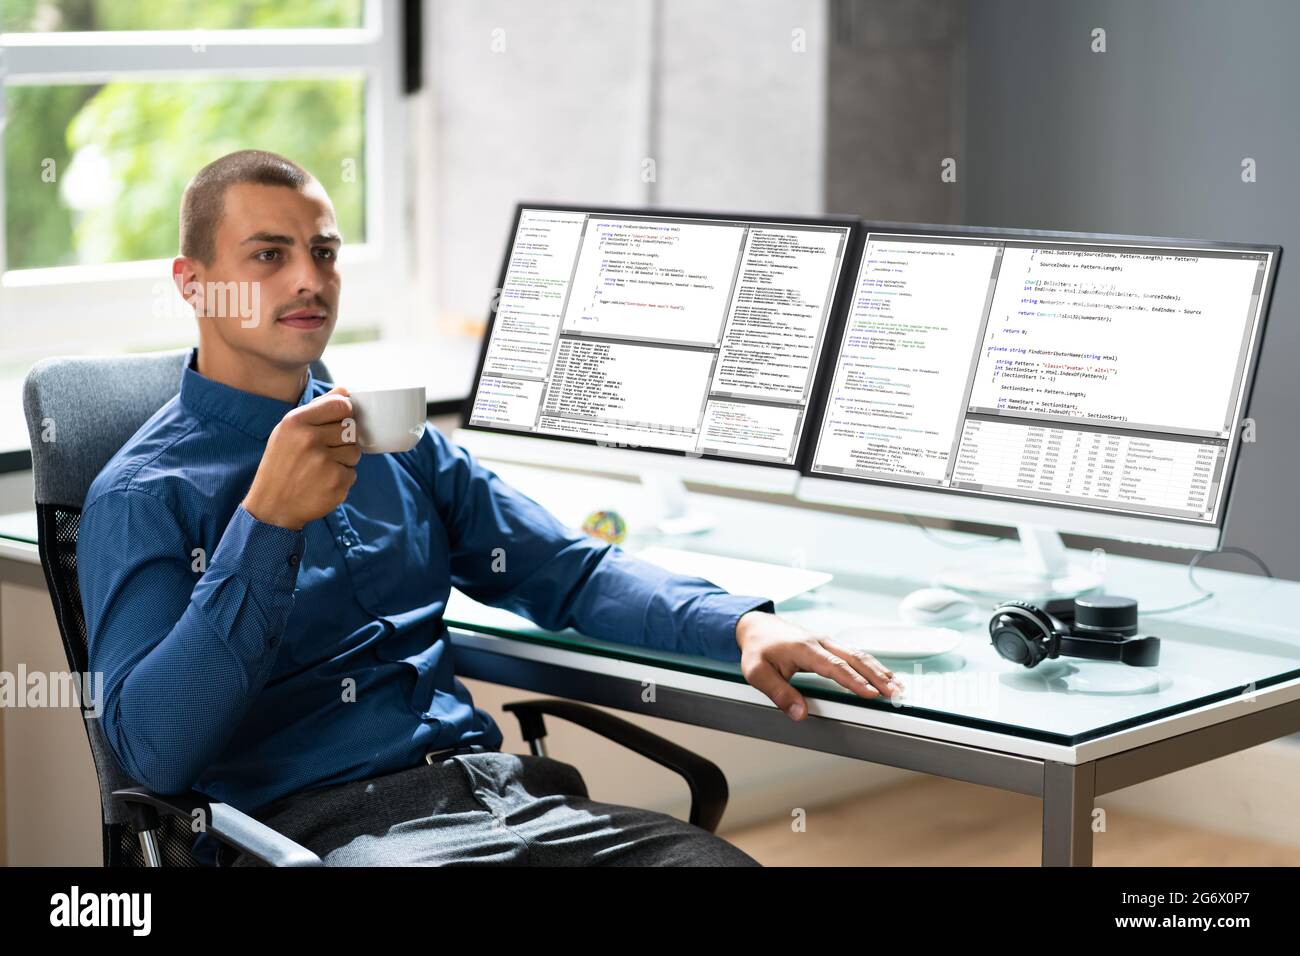 Computer Programmer Writing Program Code On Computer In Office Stock Photo